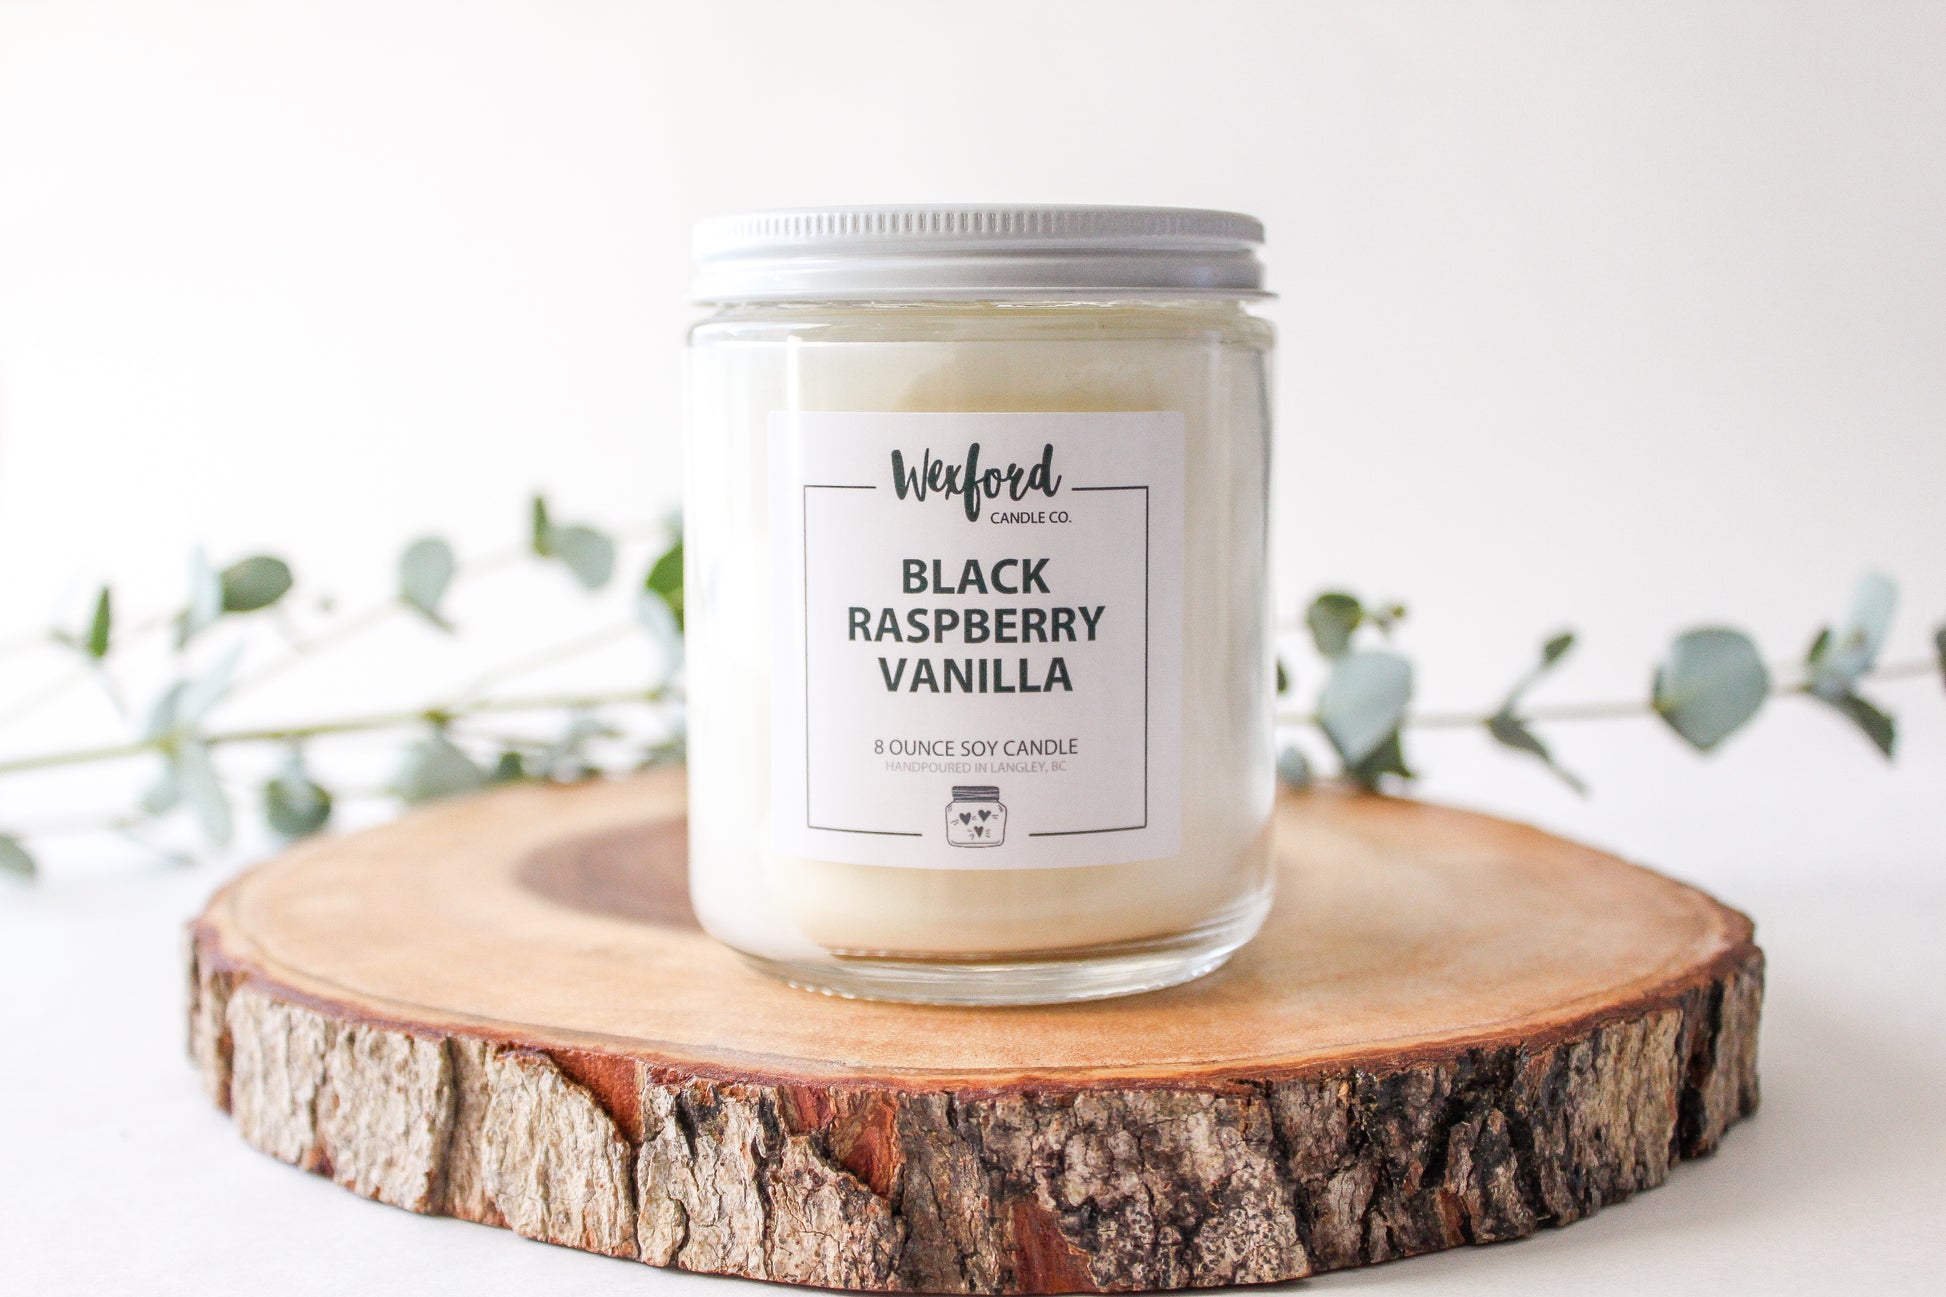 Black Raspberry Vanilla Soy Candle - Wexford Candle Co.